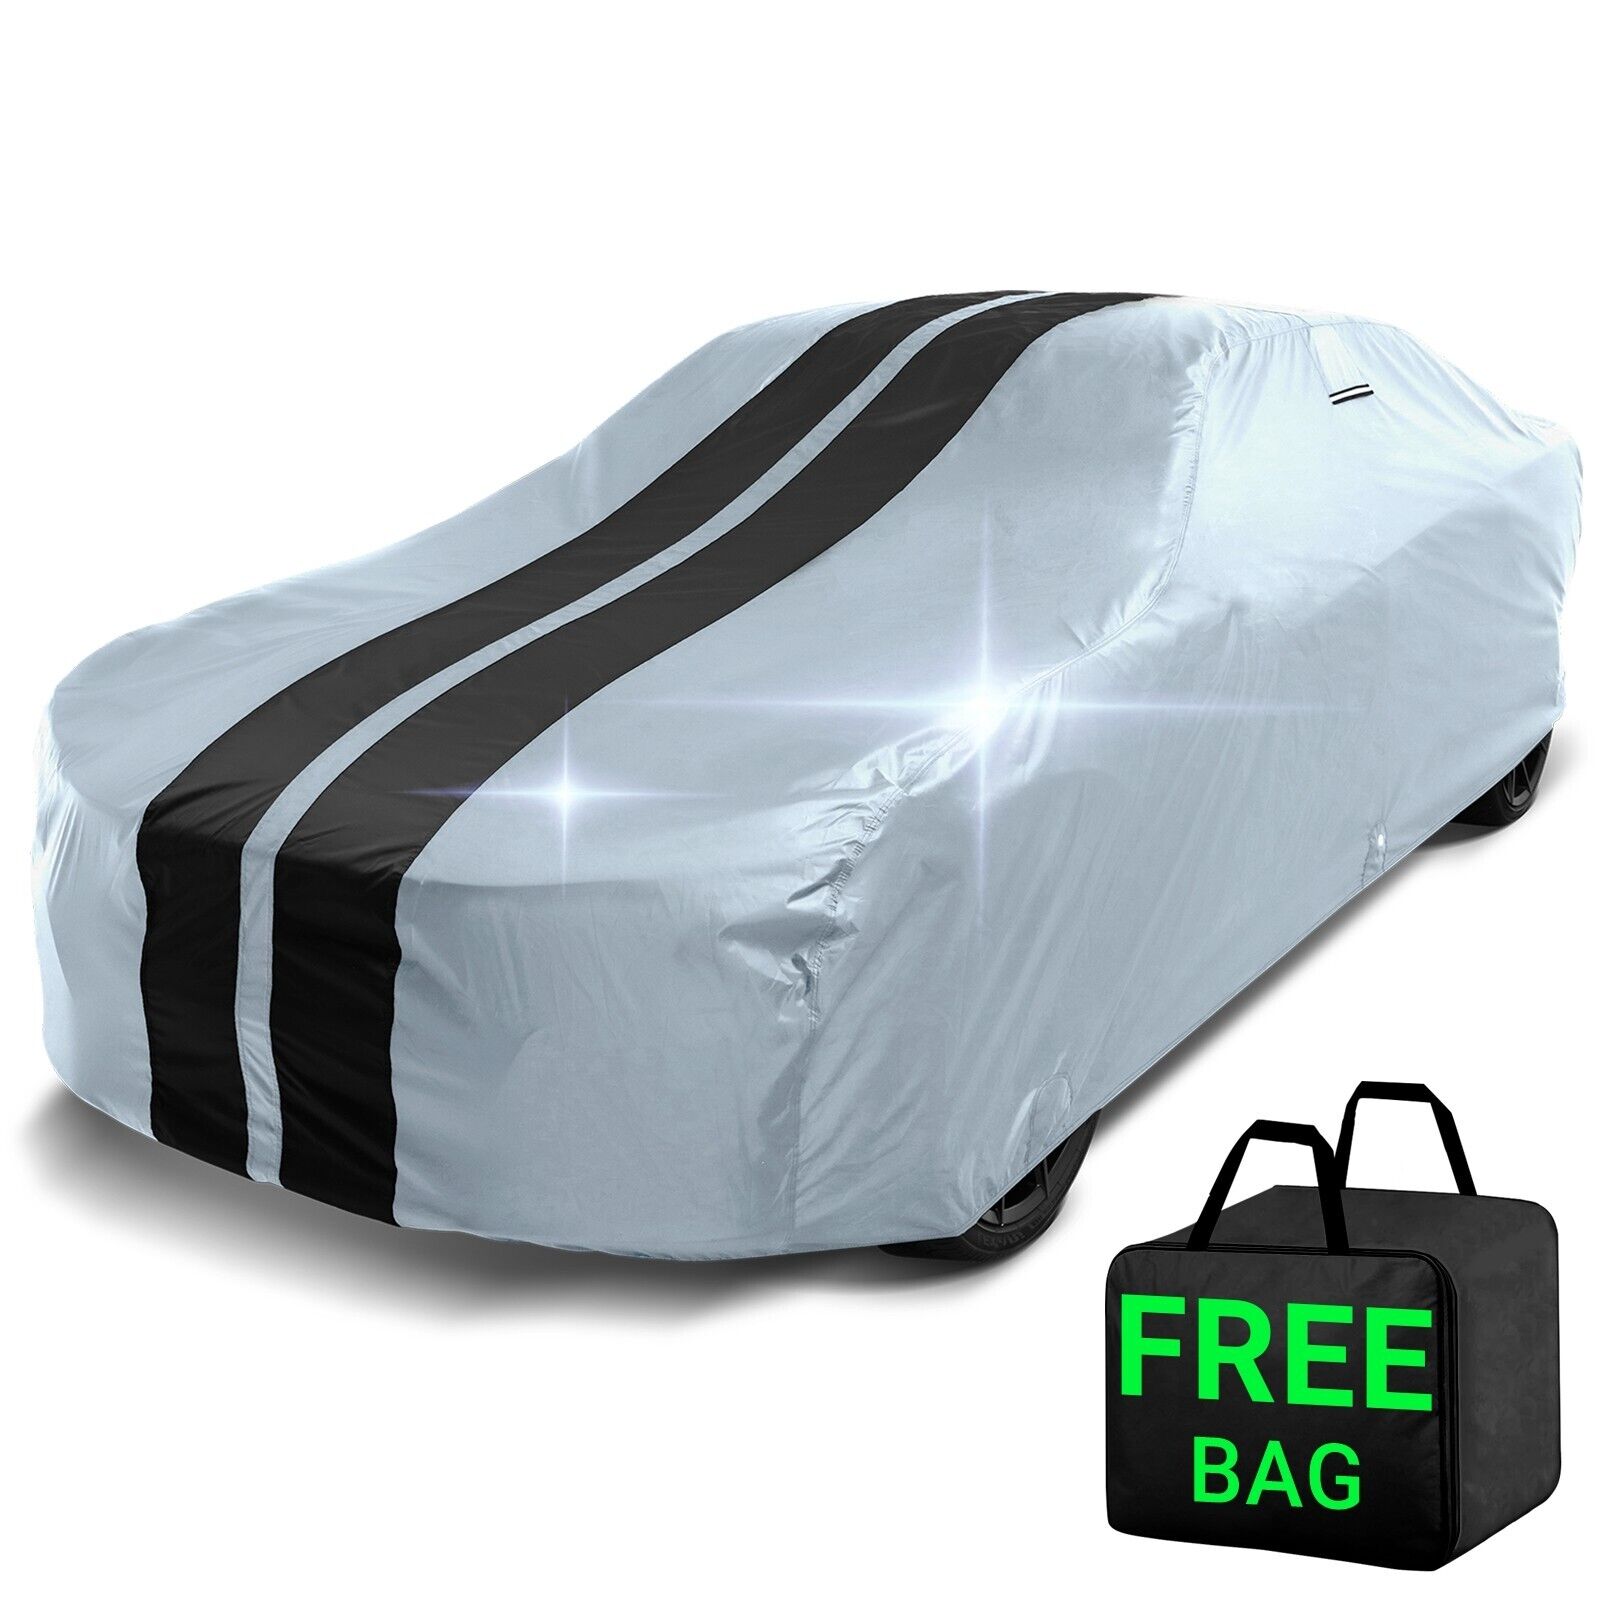 1961-1966 AMC Classic Custom Car Cover - All-Weather Waterproof Protection